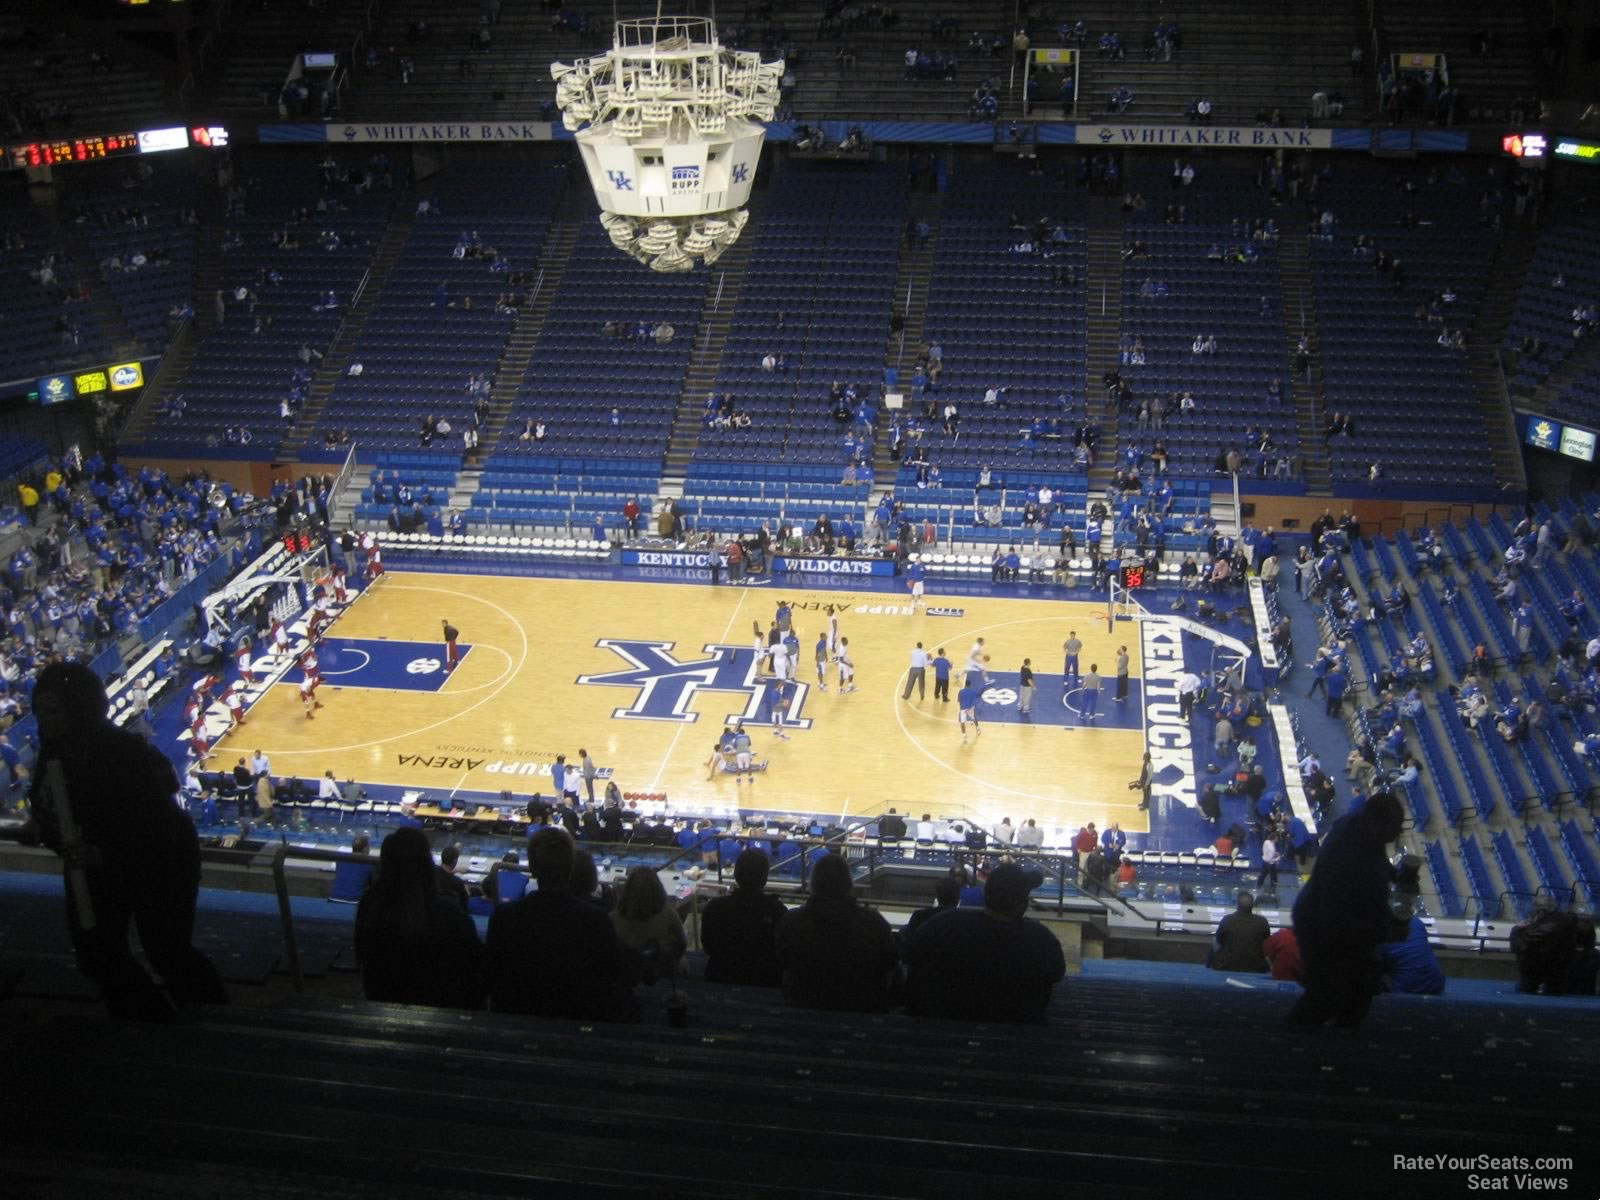 section 230, row cc seat view  for basketball - rupp arena